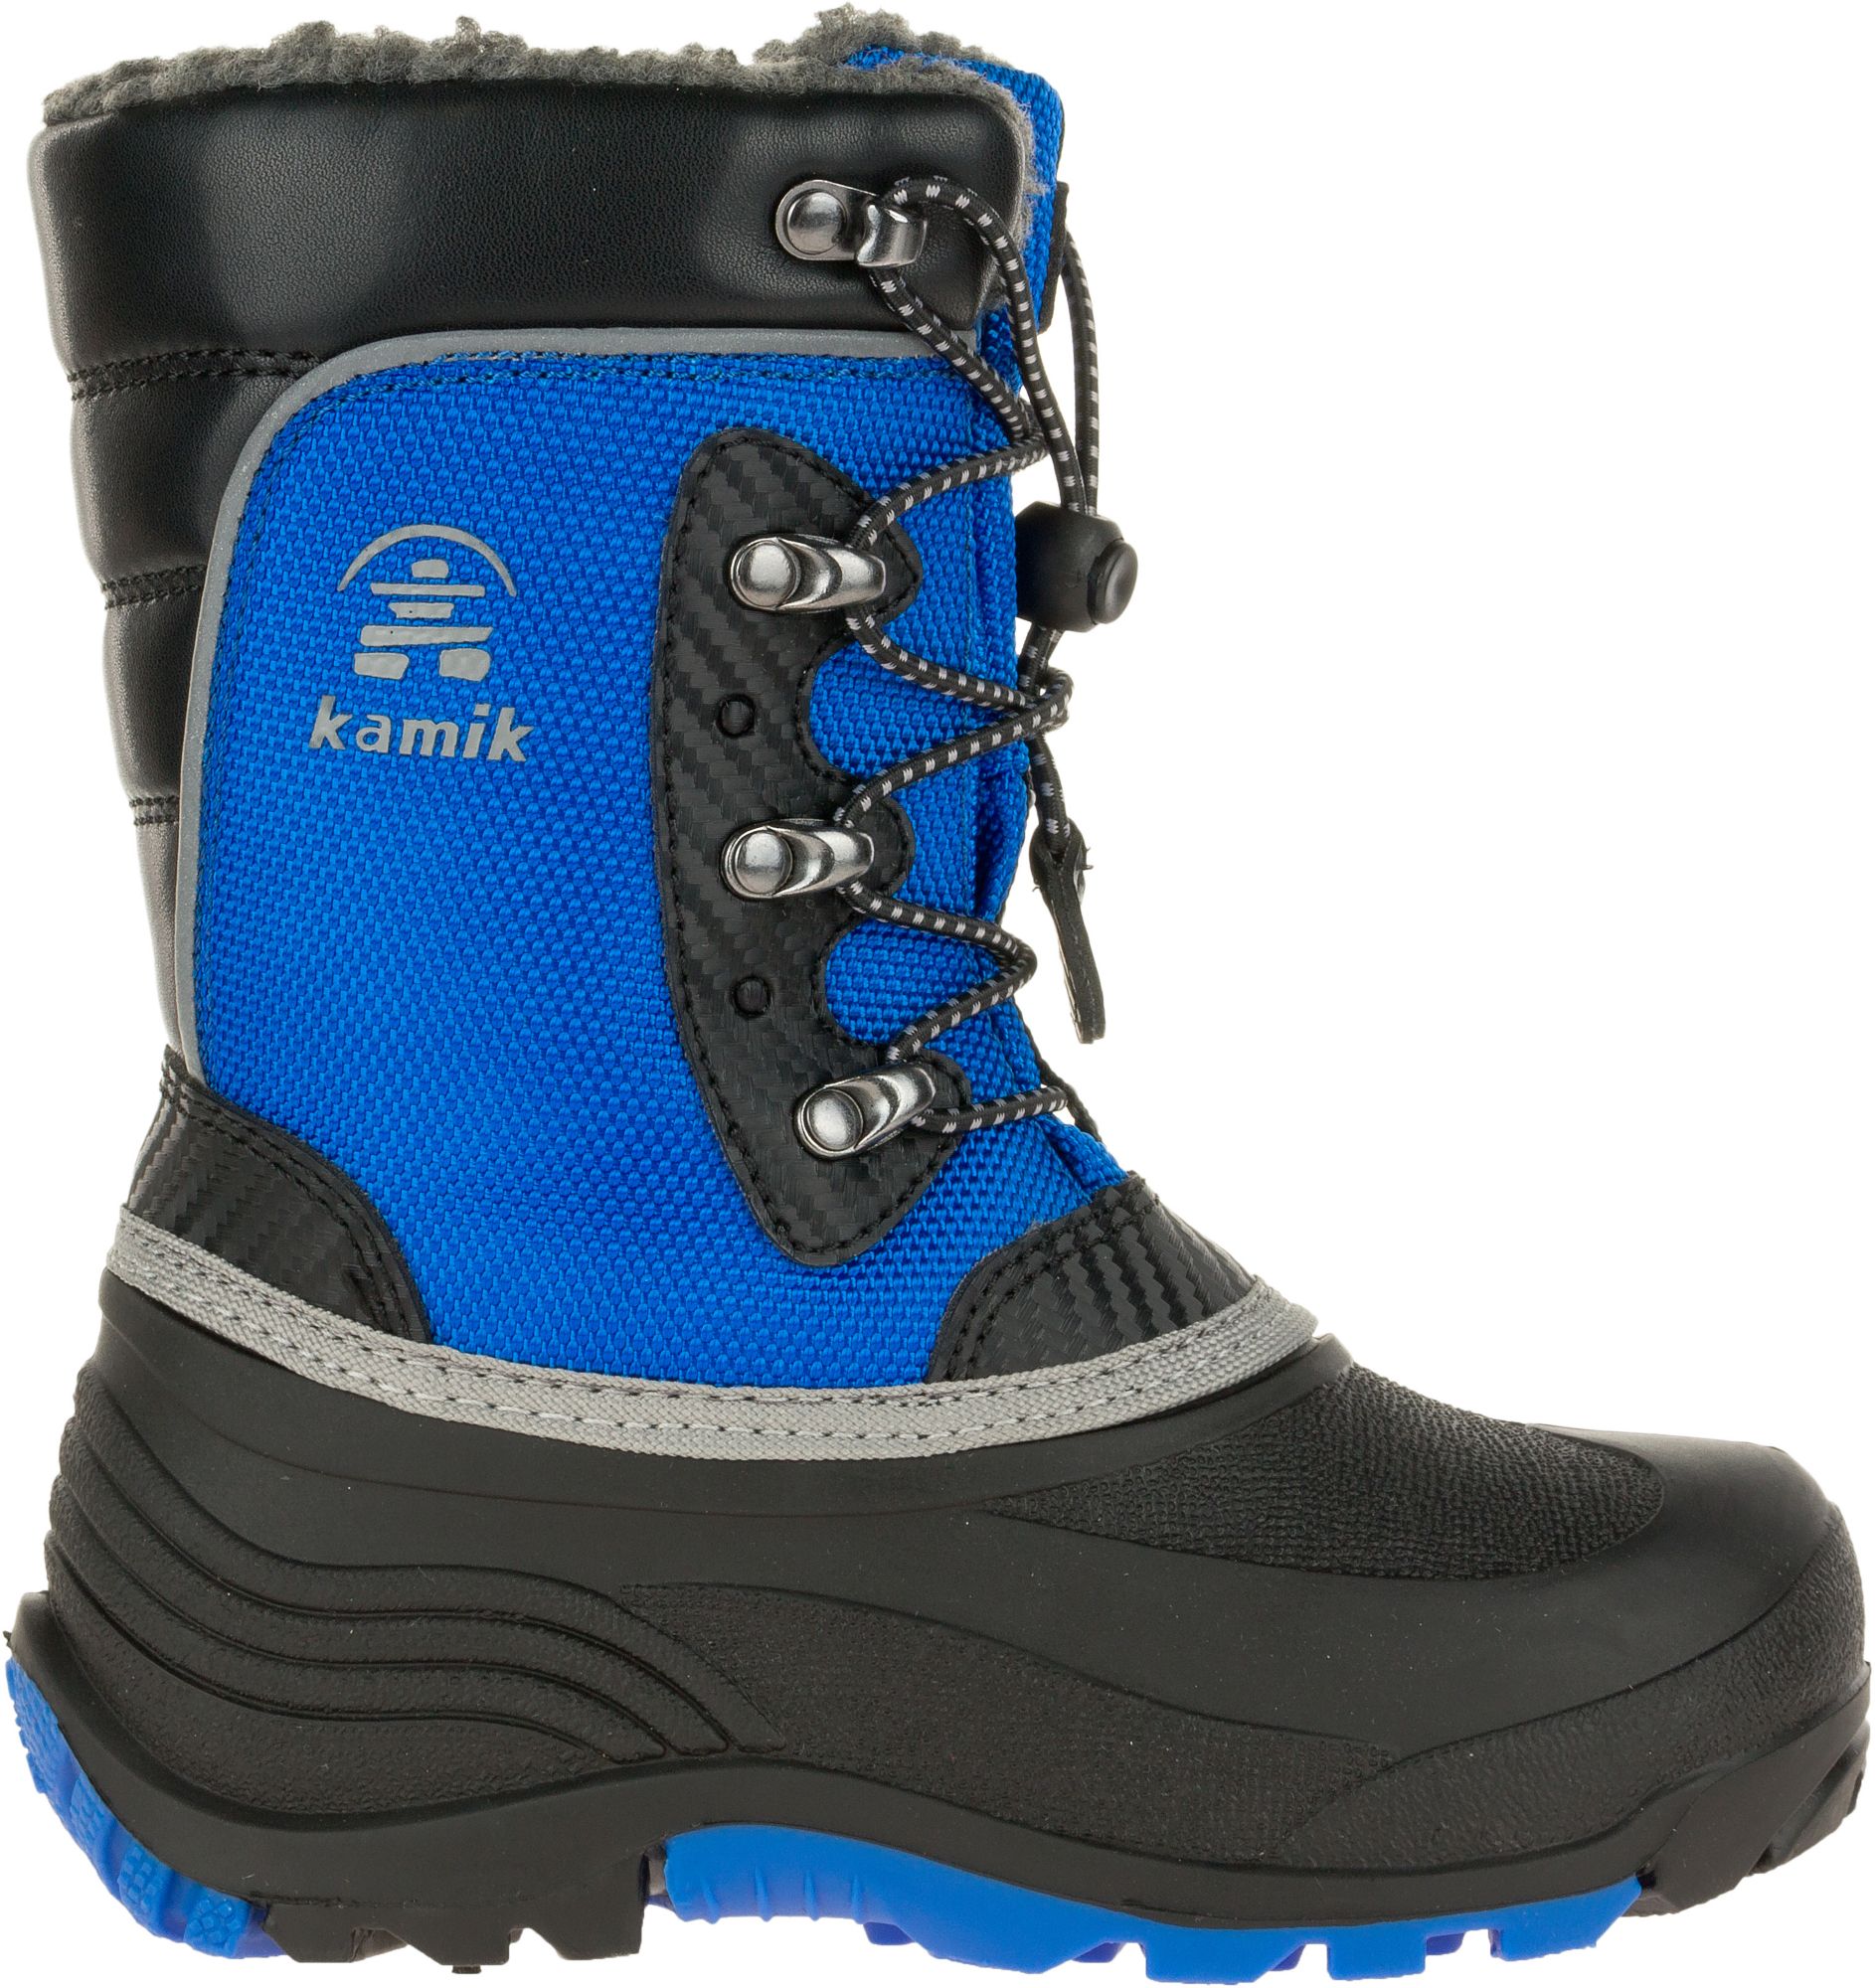 youth waterproof snow boots